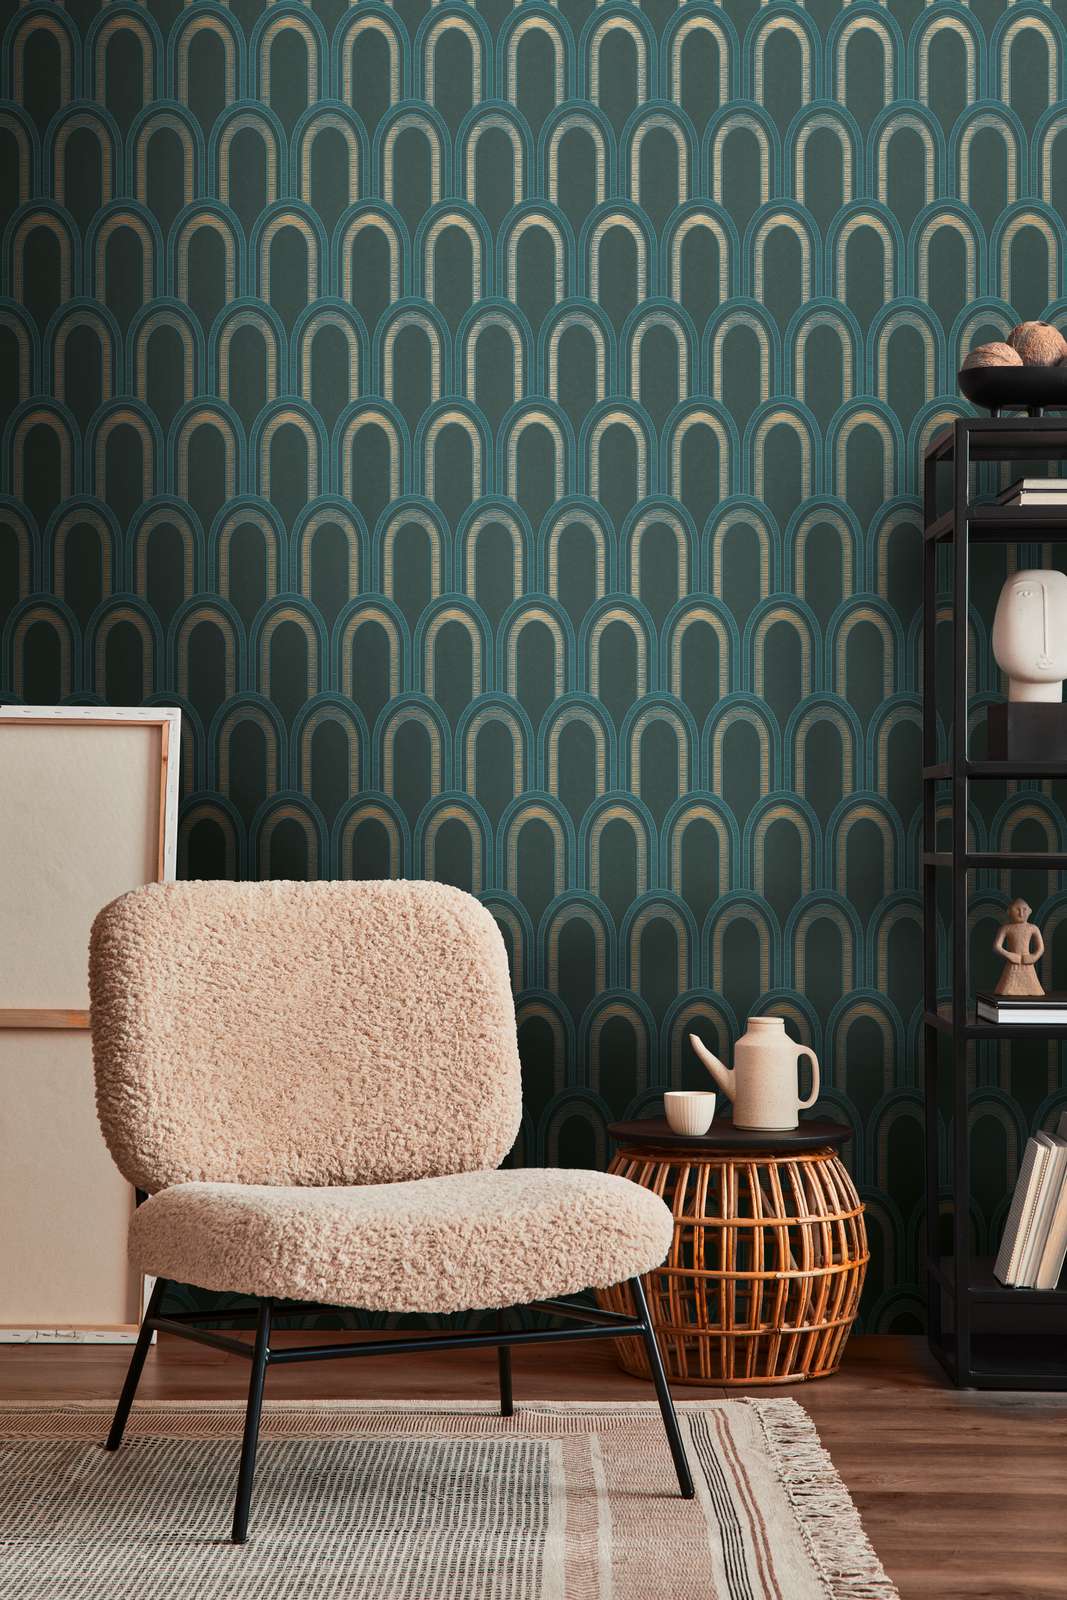             Wallpaper with bow pattern and glossy effect - petrol, blue, gold
        